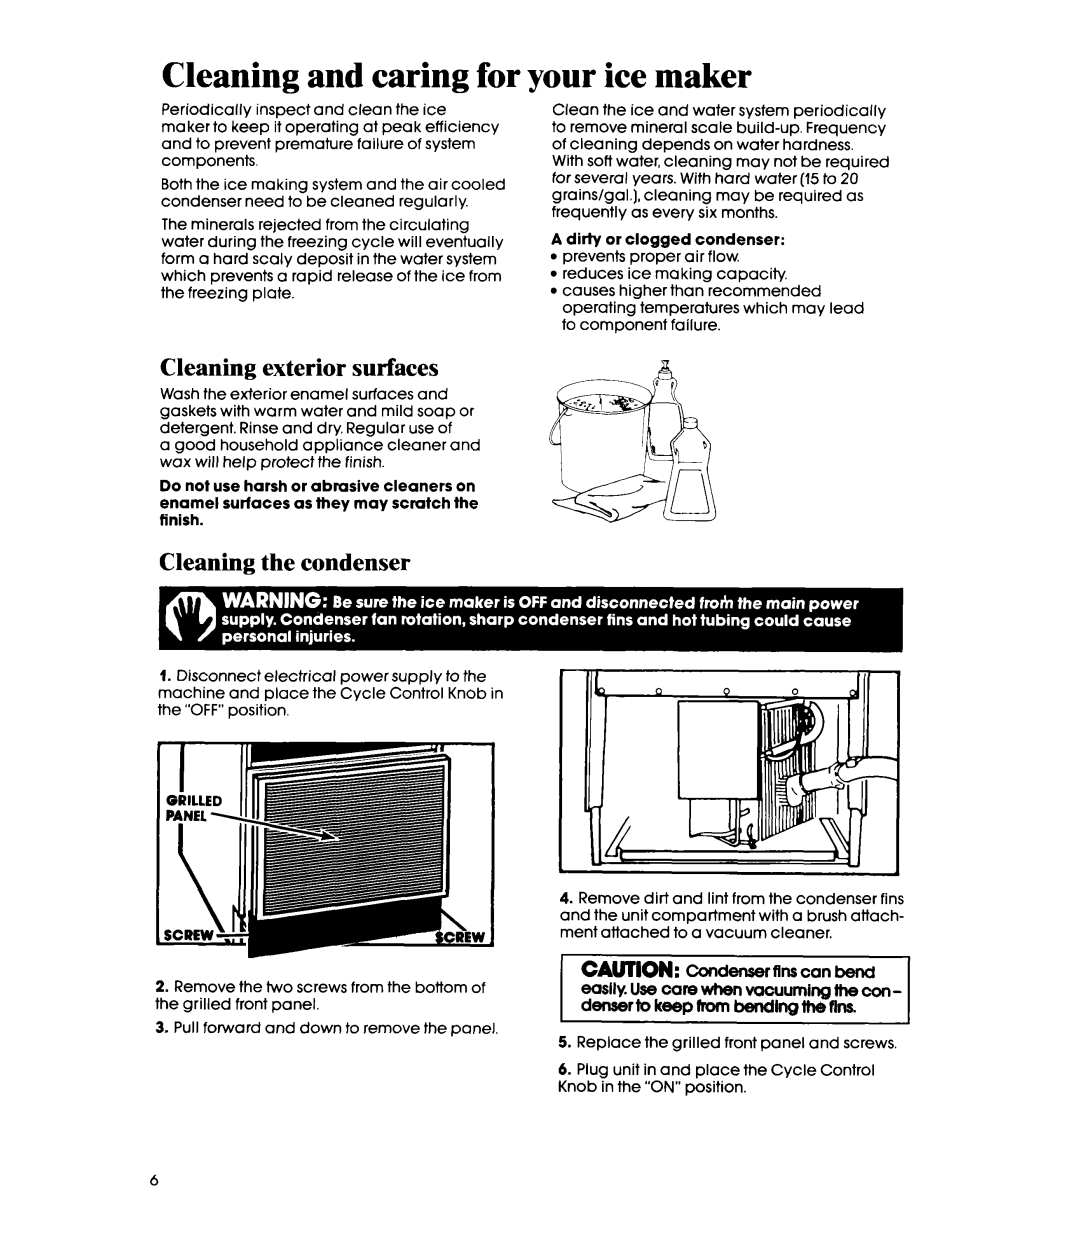 Whirlpool EC5100 manual Cleaning and caring for your ice maker, Cleaning exterior surfaces, Cleaning the condenser 